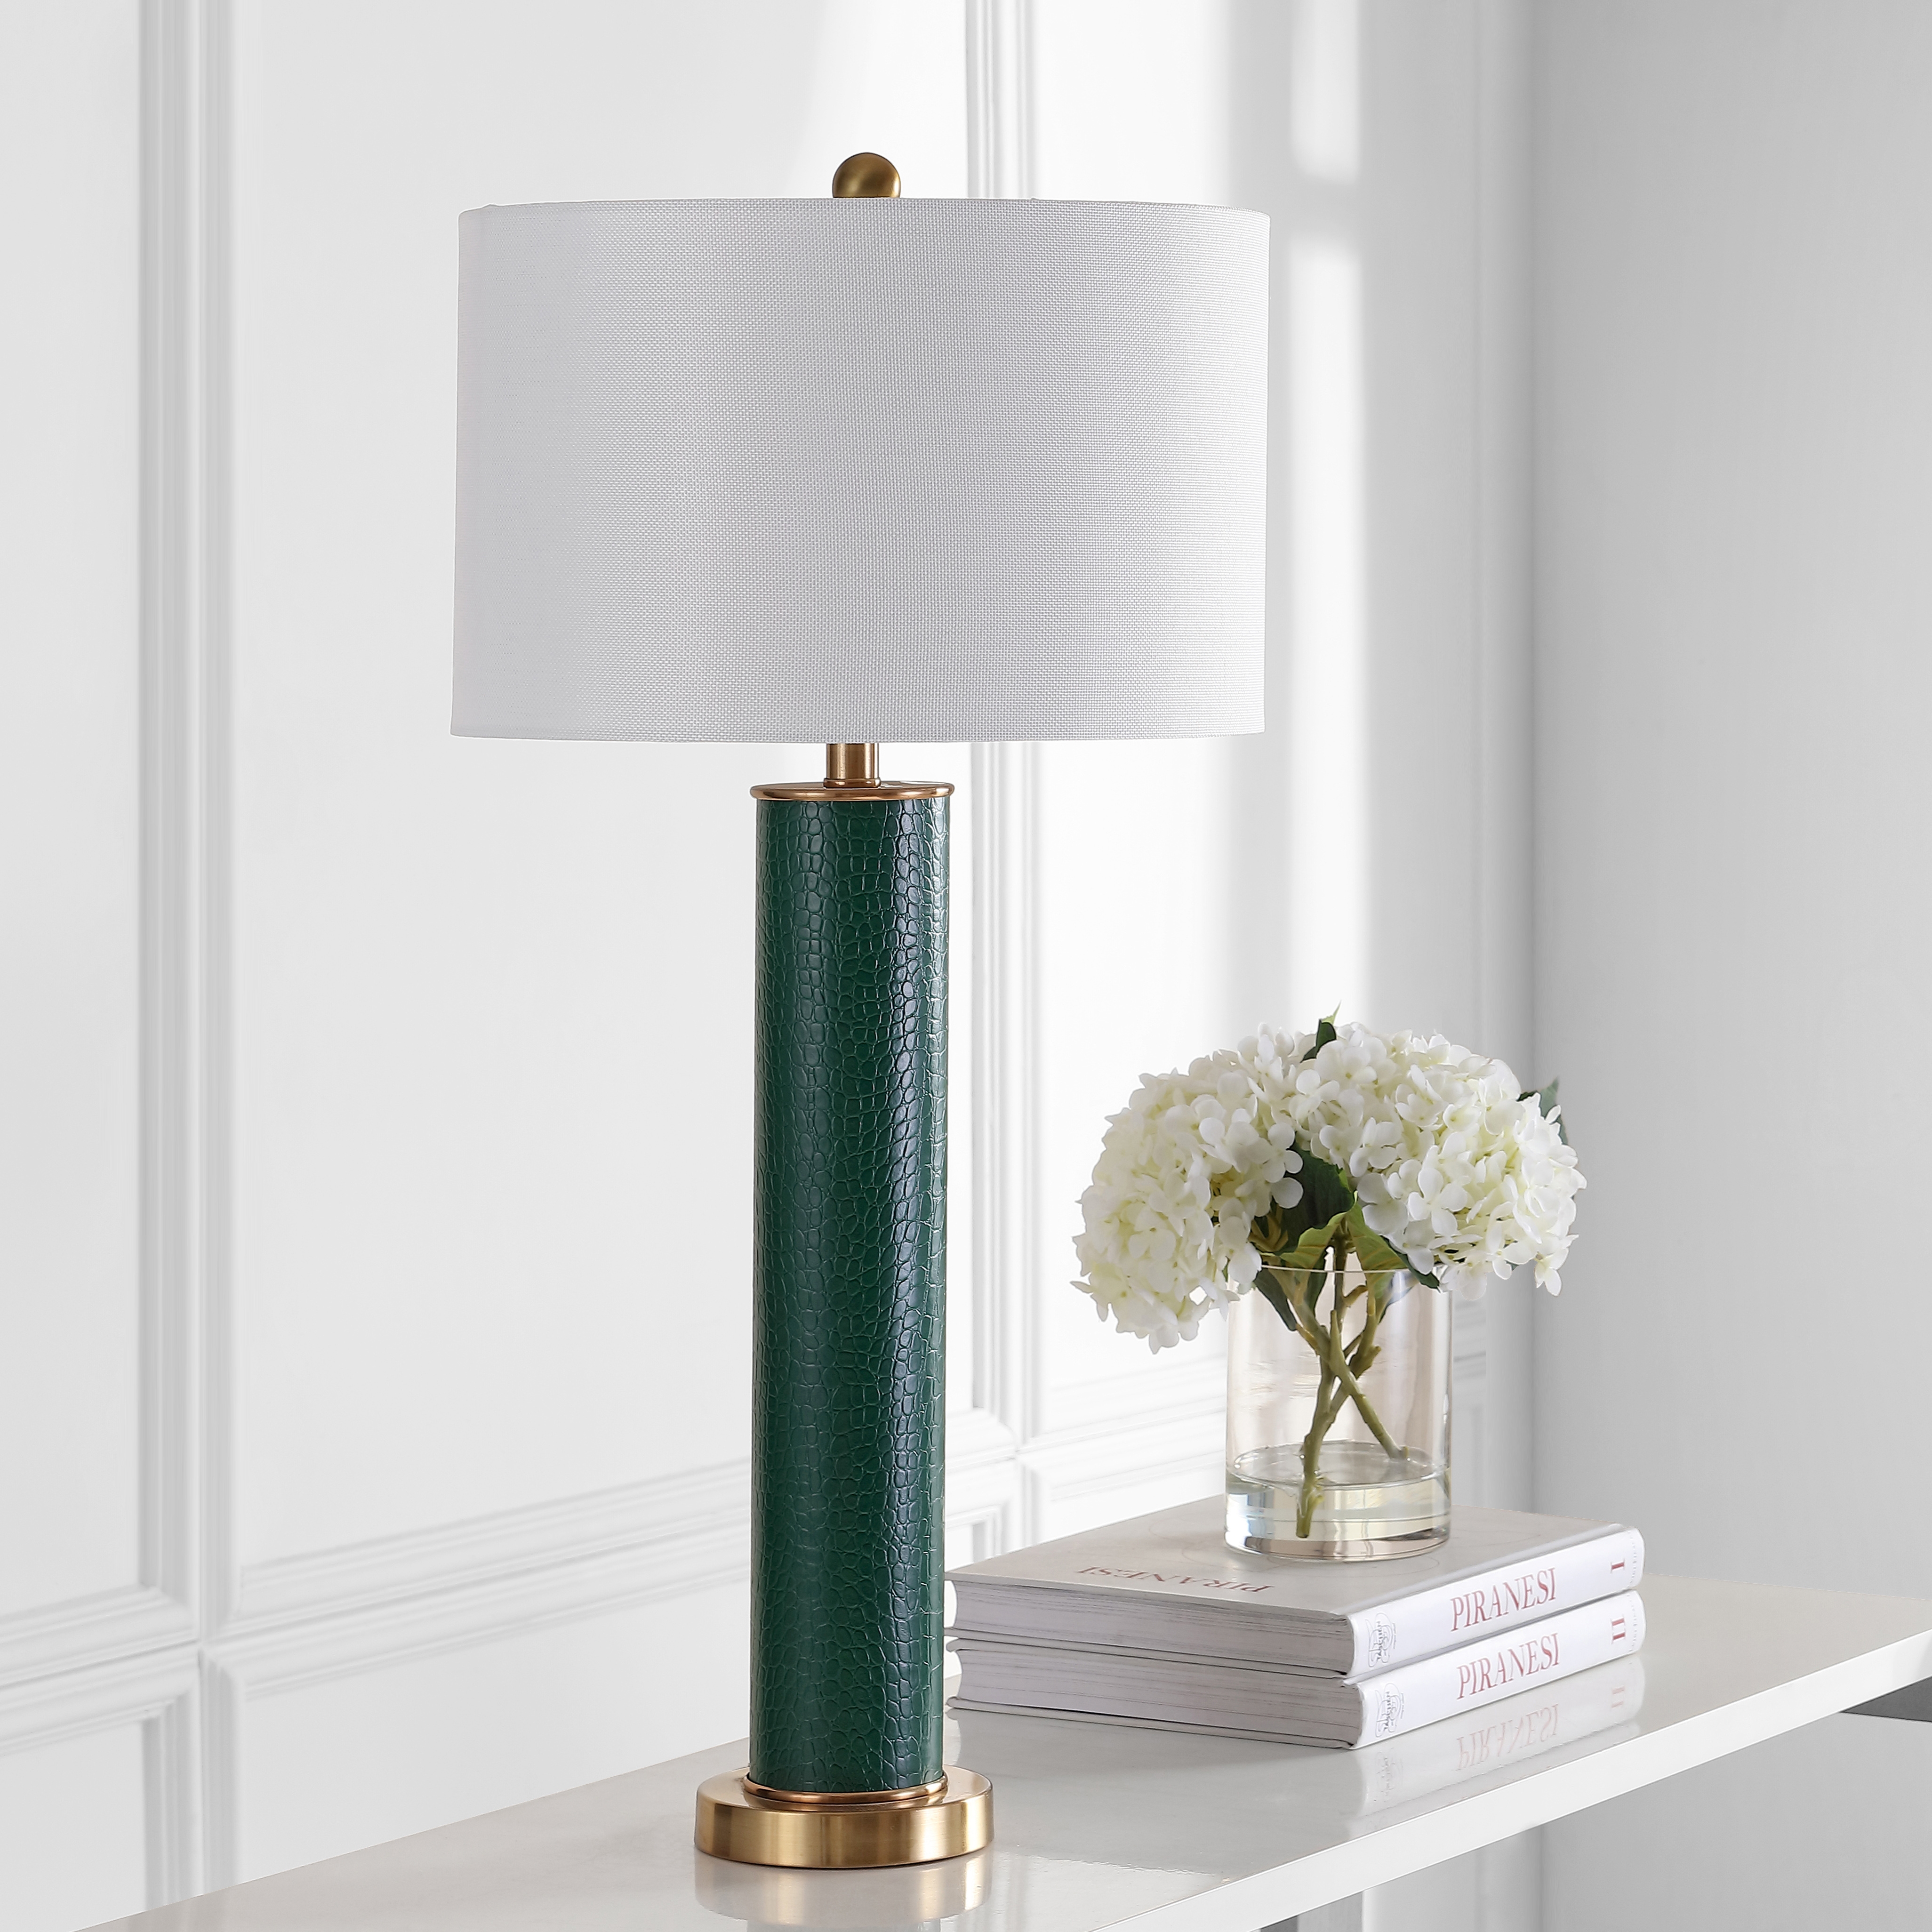 Ollie 31.5-Inch H Faux Alligator Table Lamp - Dark Green - Arlo Home - Image 4